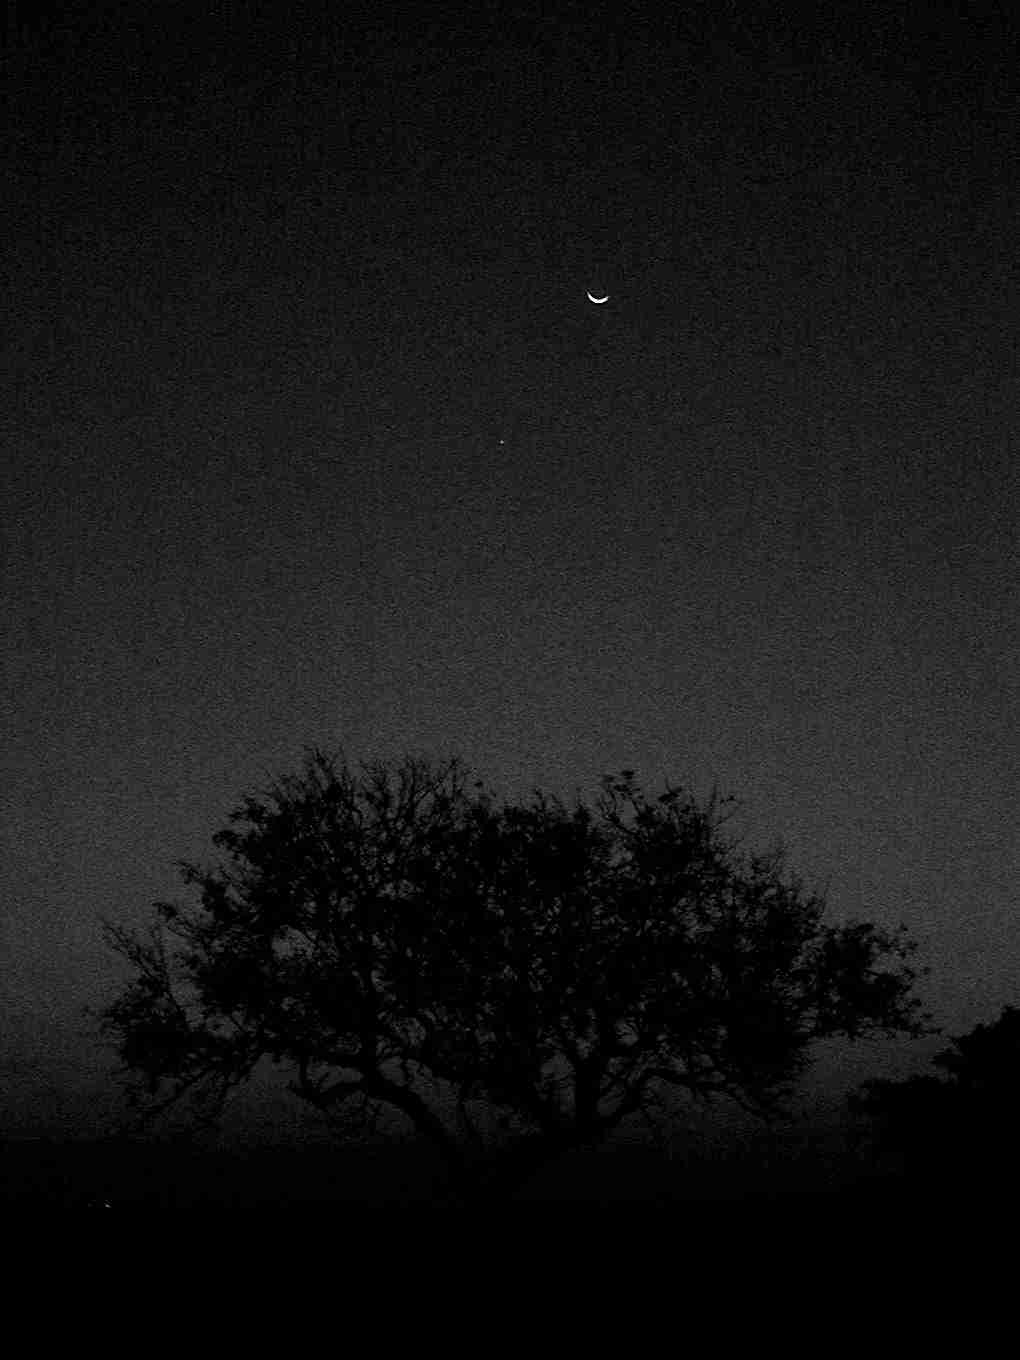 A sliver of a moon and the silhouette of a tree